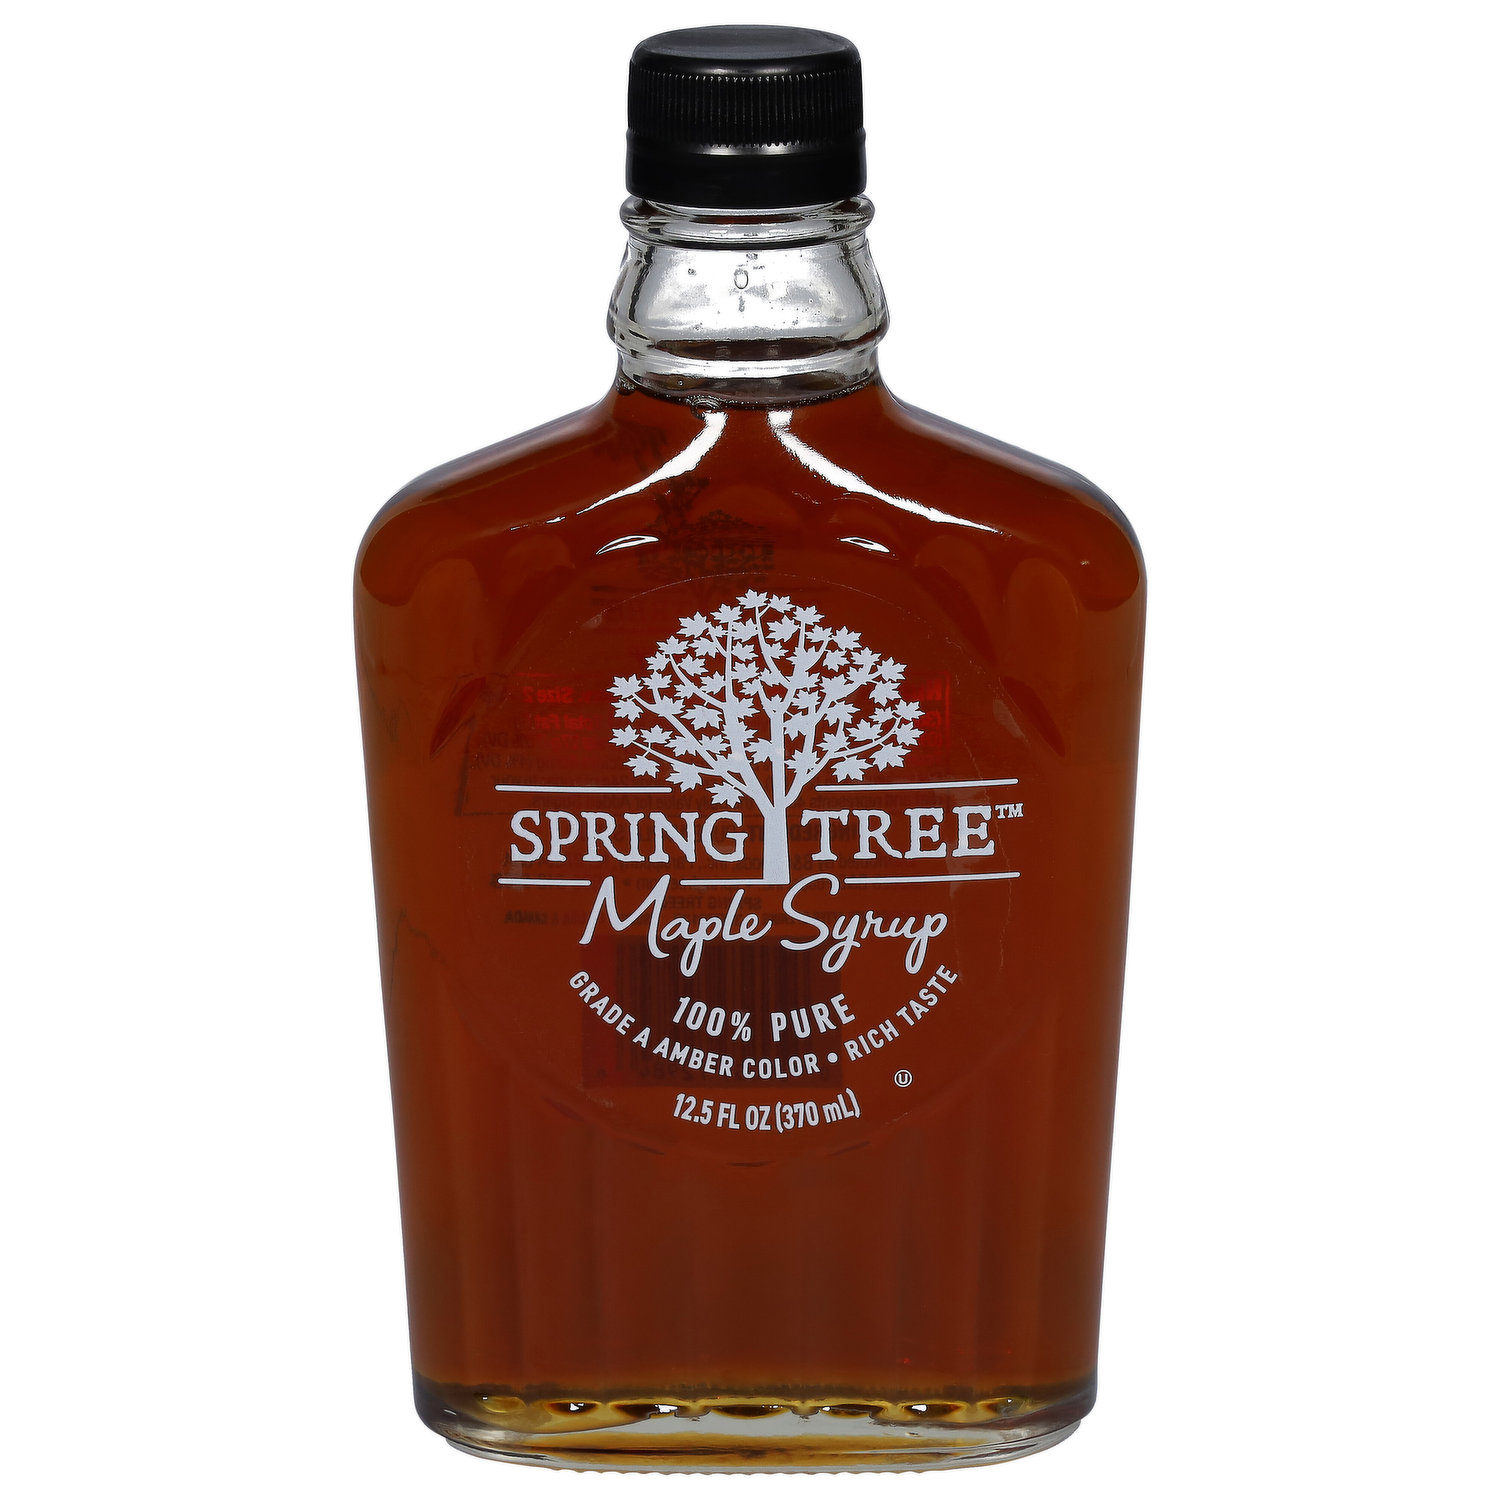 Spring Tree Maple Syrup, 100% Pure - Smart & Final